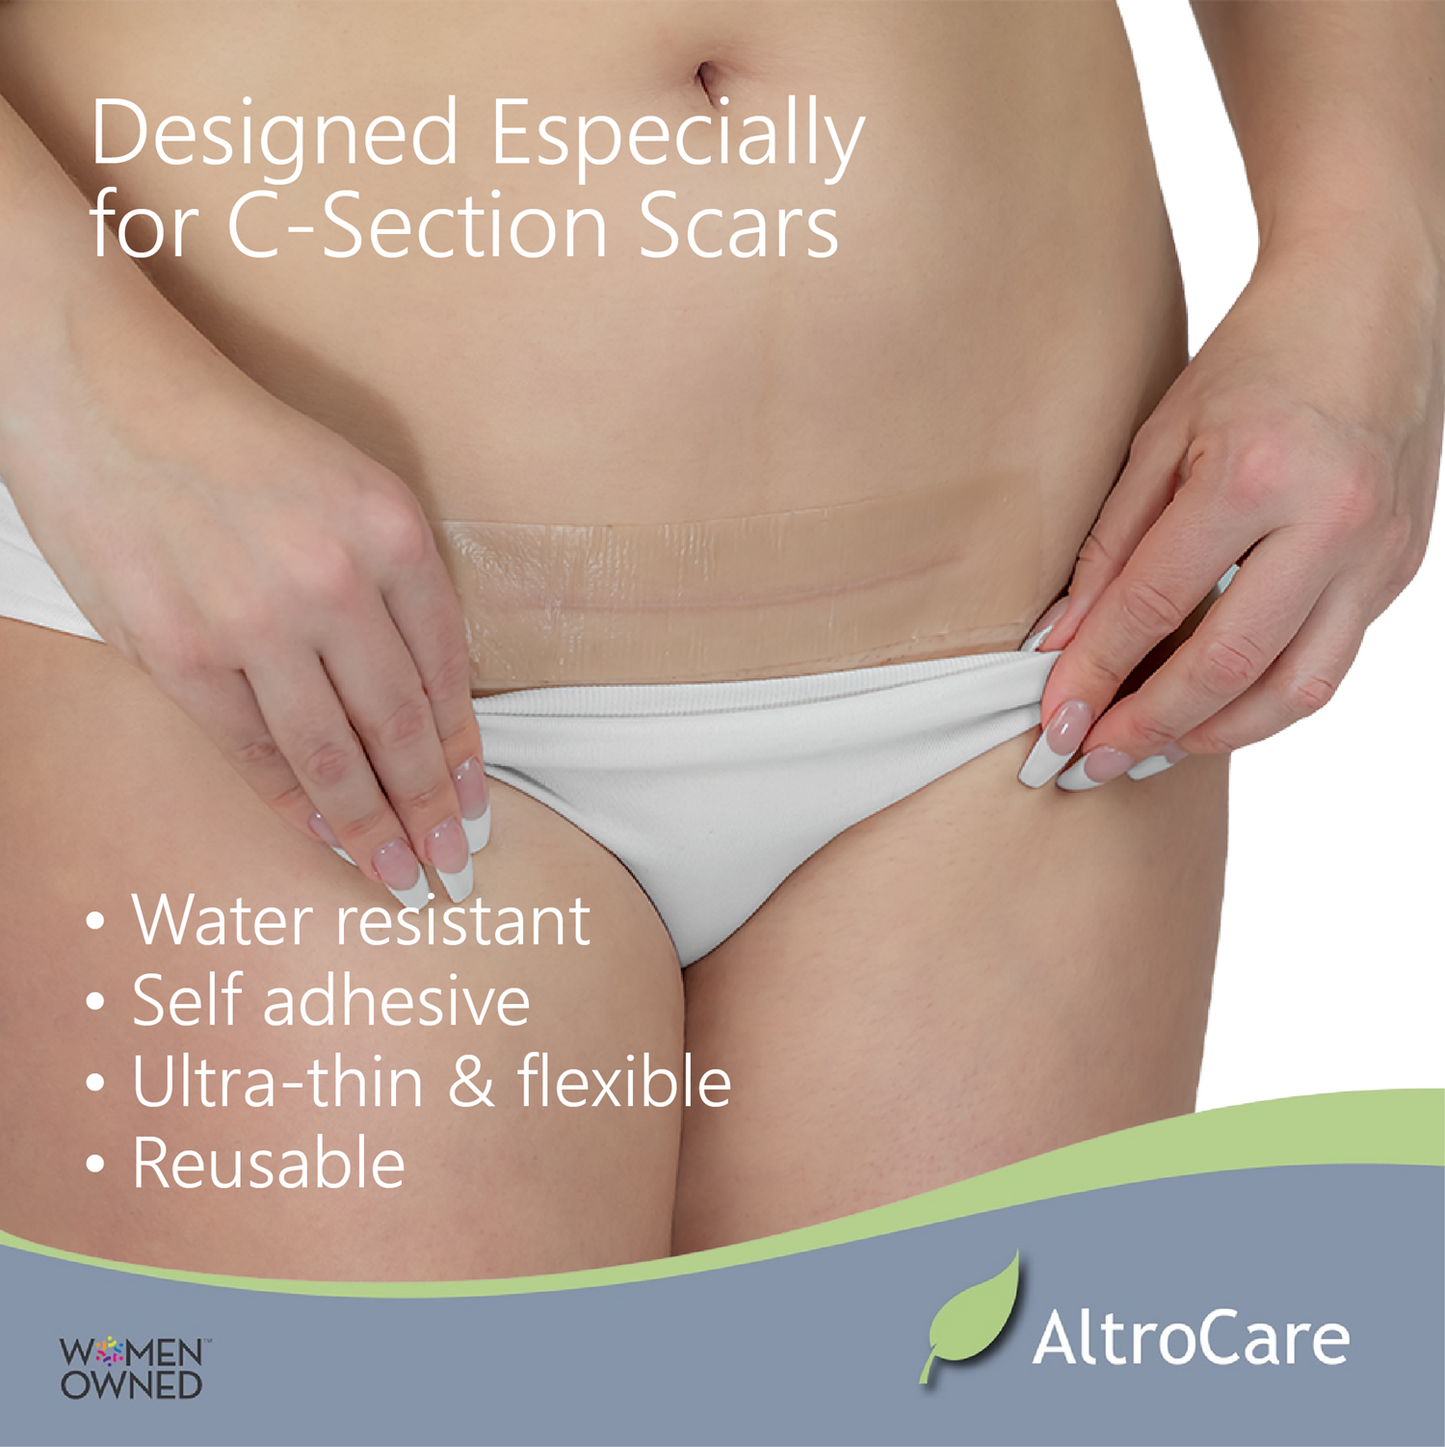 C-Section Scar Sheets (Case of 25 packs)